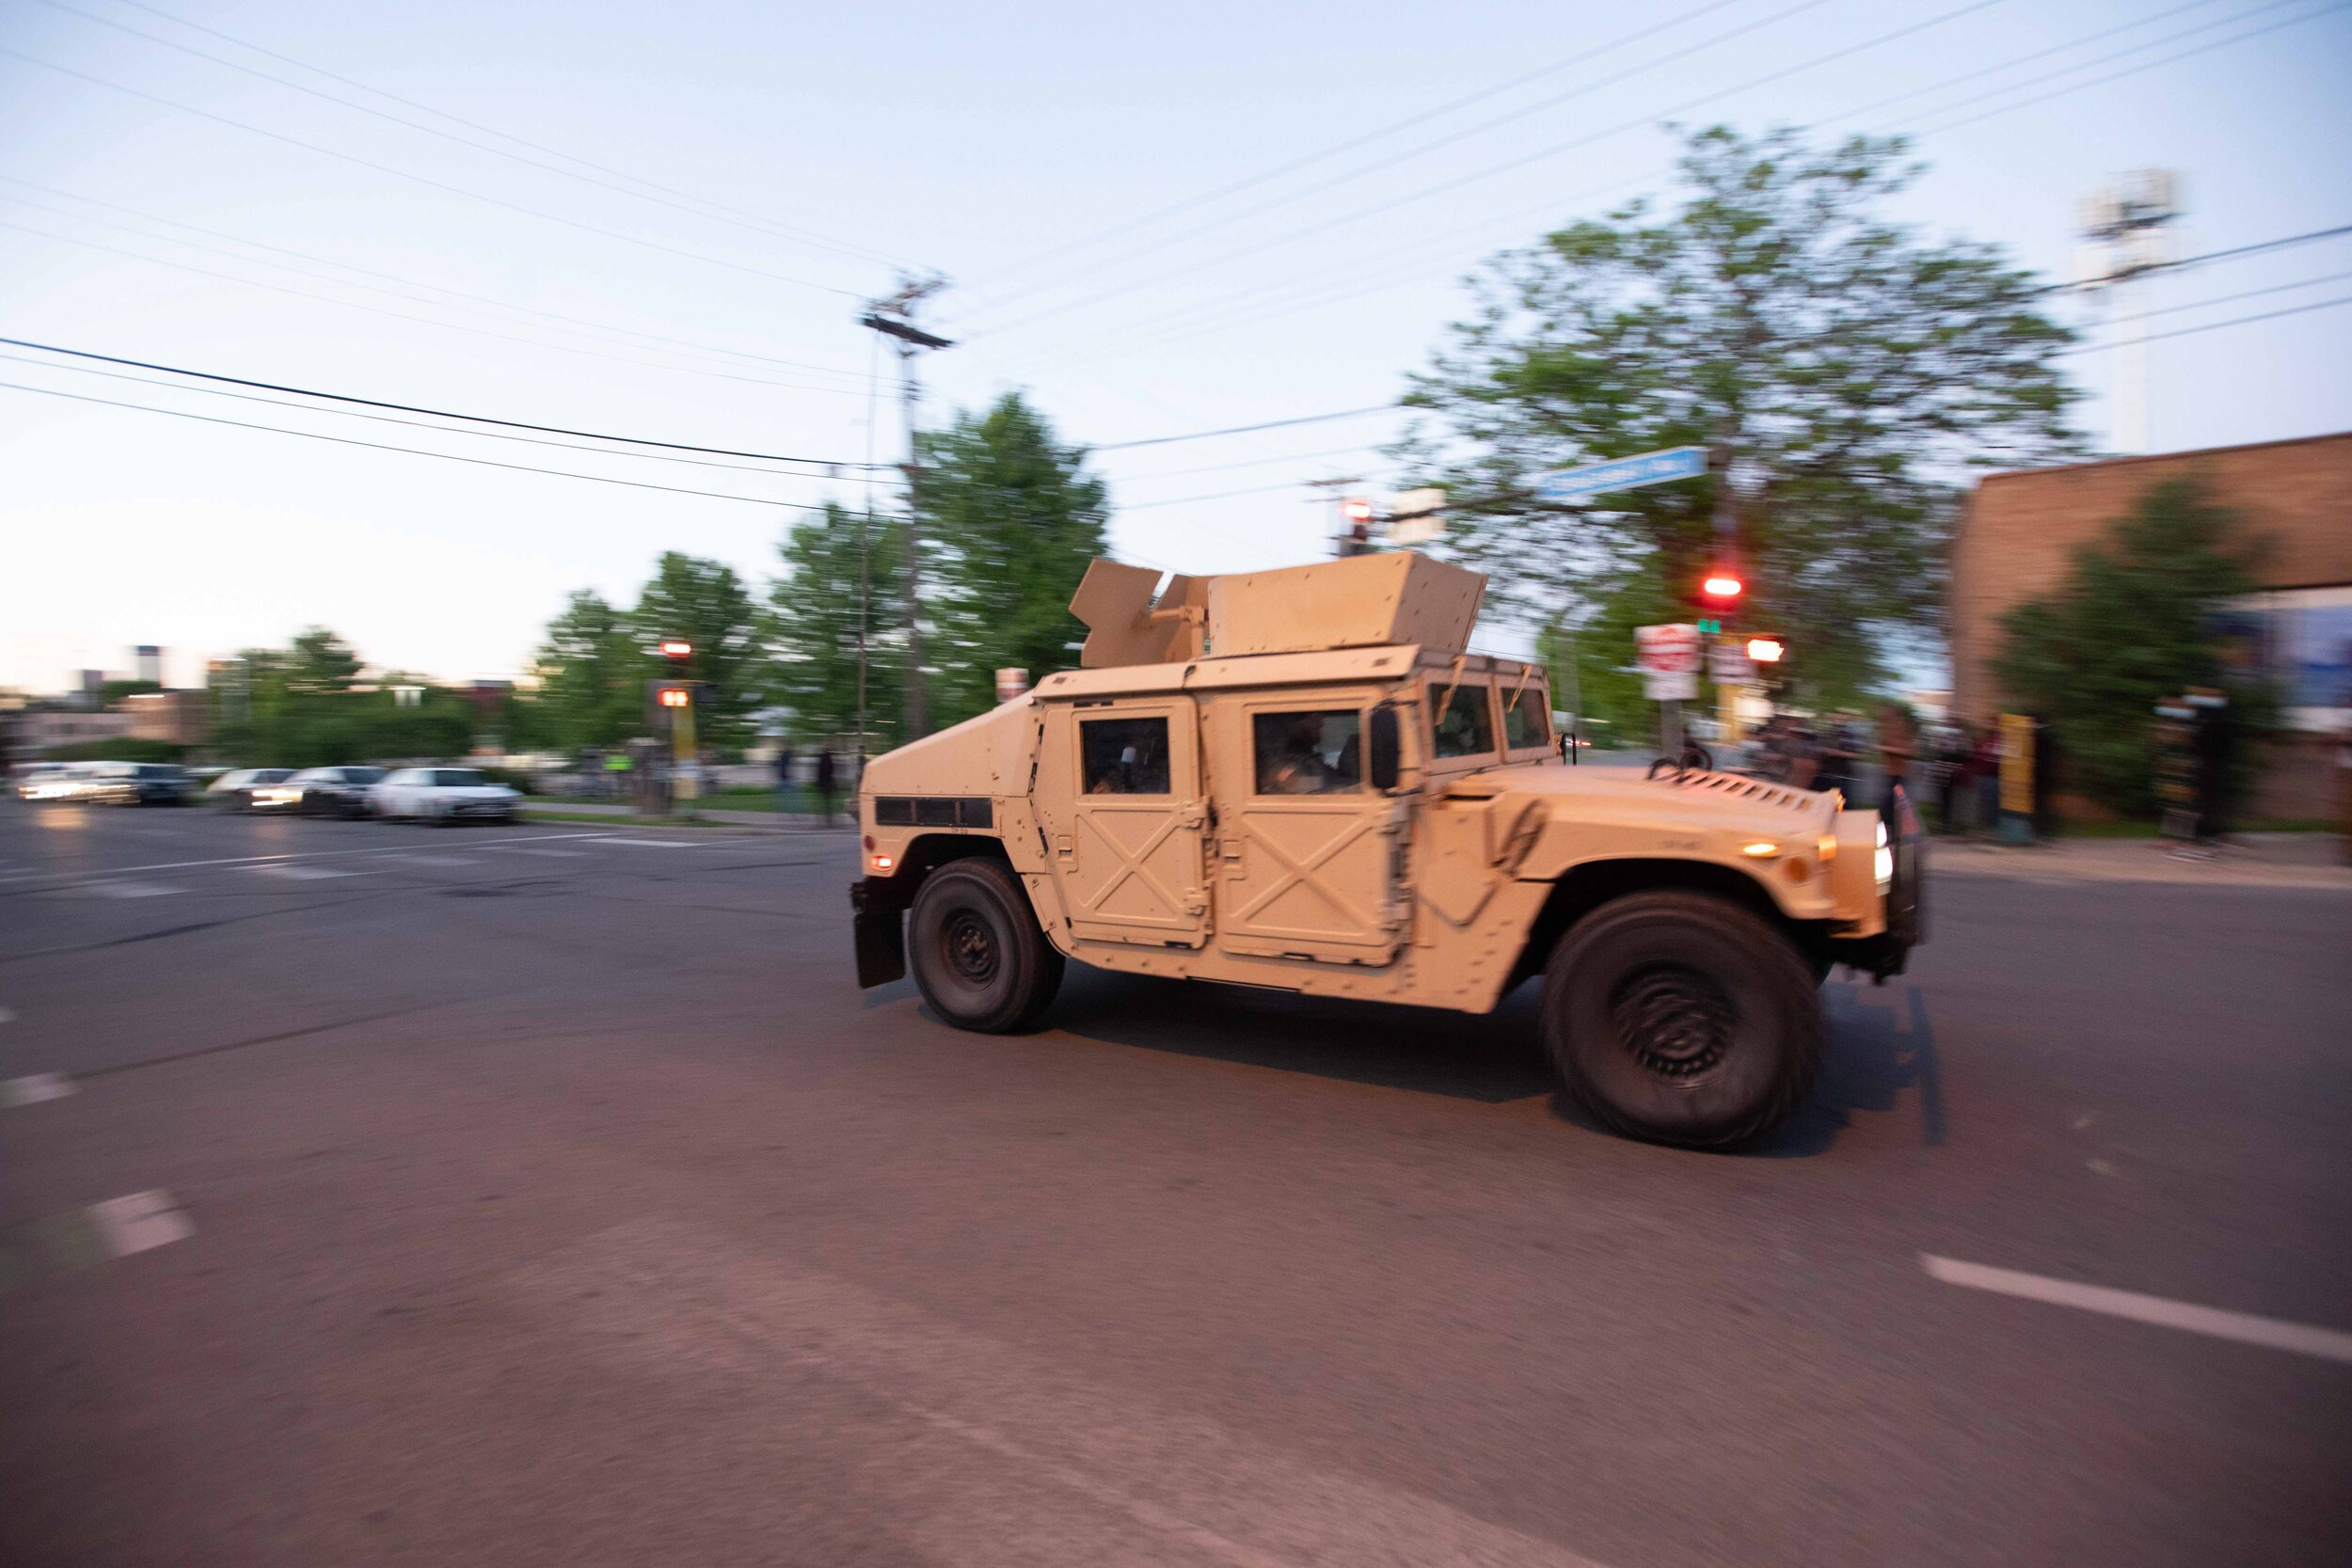  A humvee speeds down a street in Minneapolis where it was headed to help arrest protesters in Minneapolis, Minnesota on May 30, 2020. Chris Juhn/Zuma. 